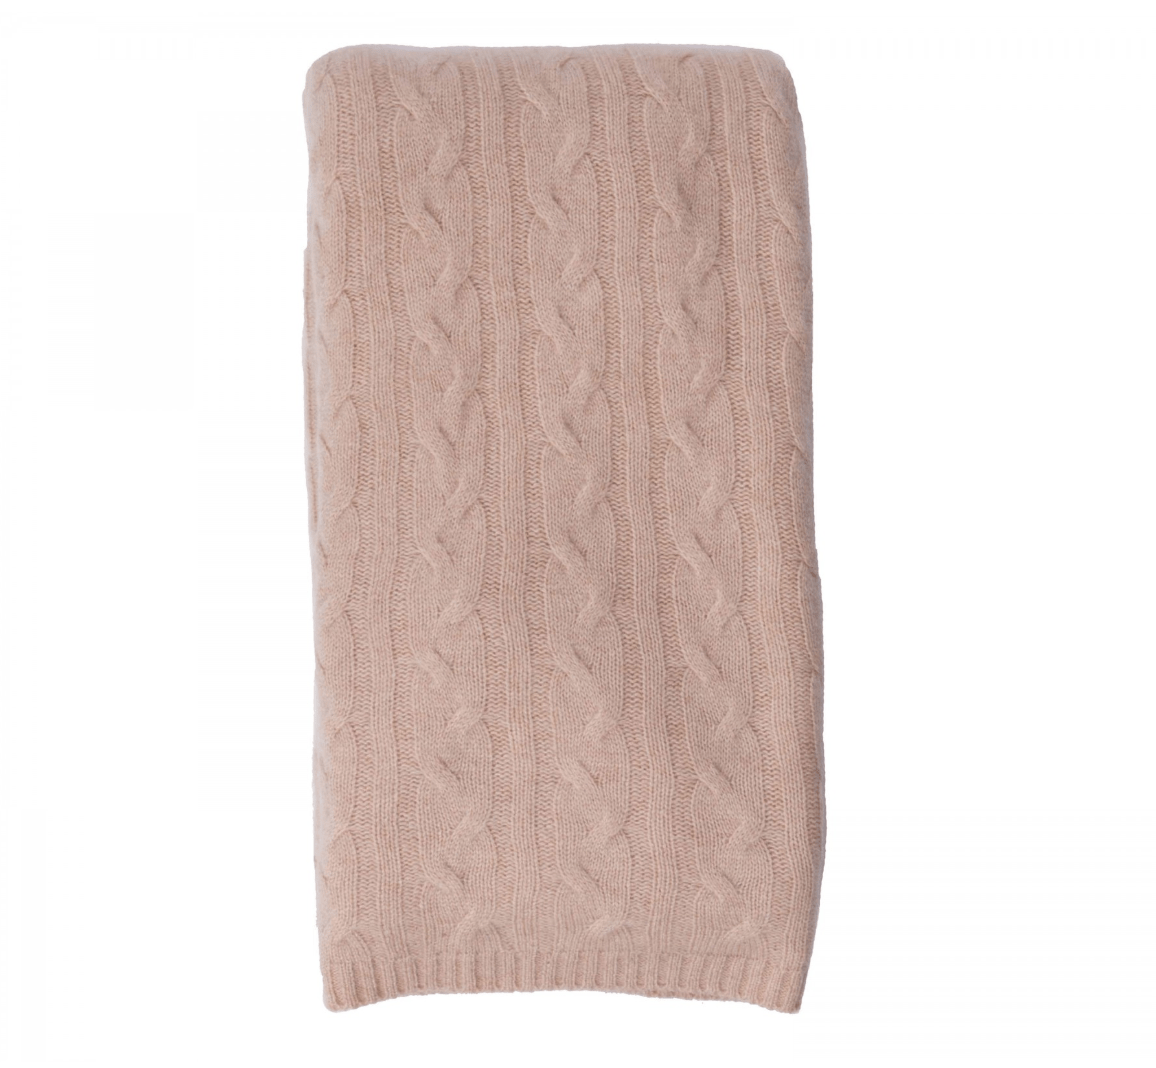 100% Cashmere Throw - Mongolian Cream 451 - Alashan Cashmere at Fig Linens and Home